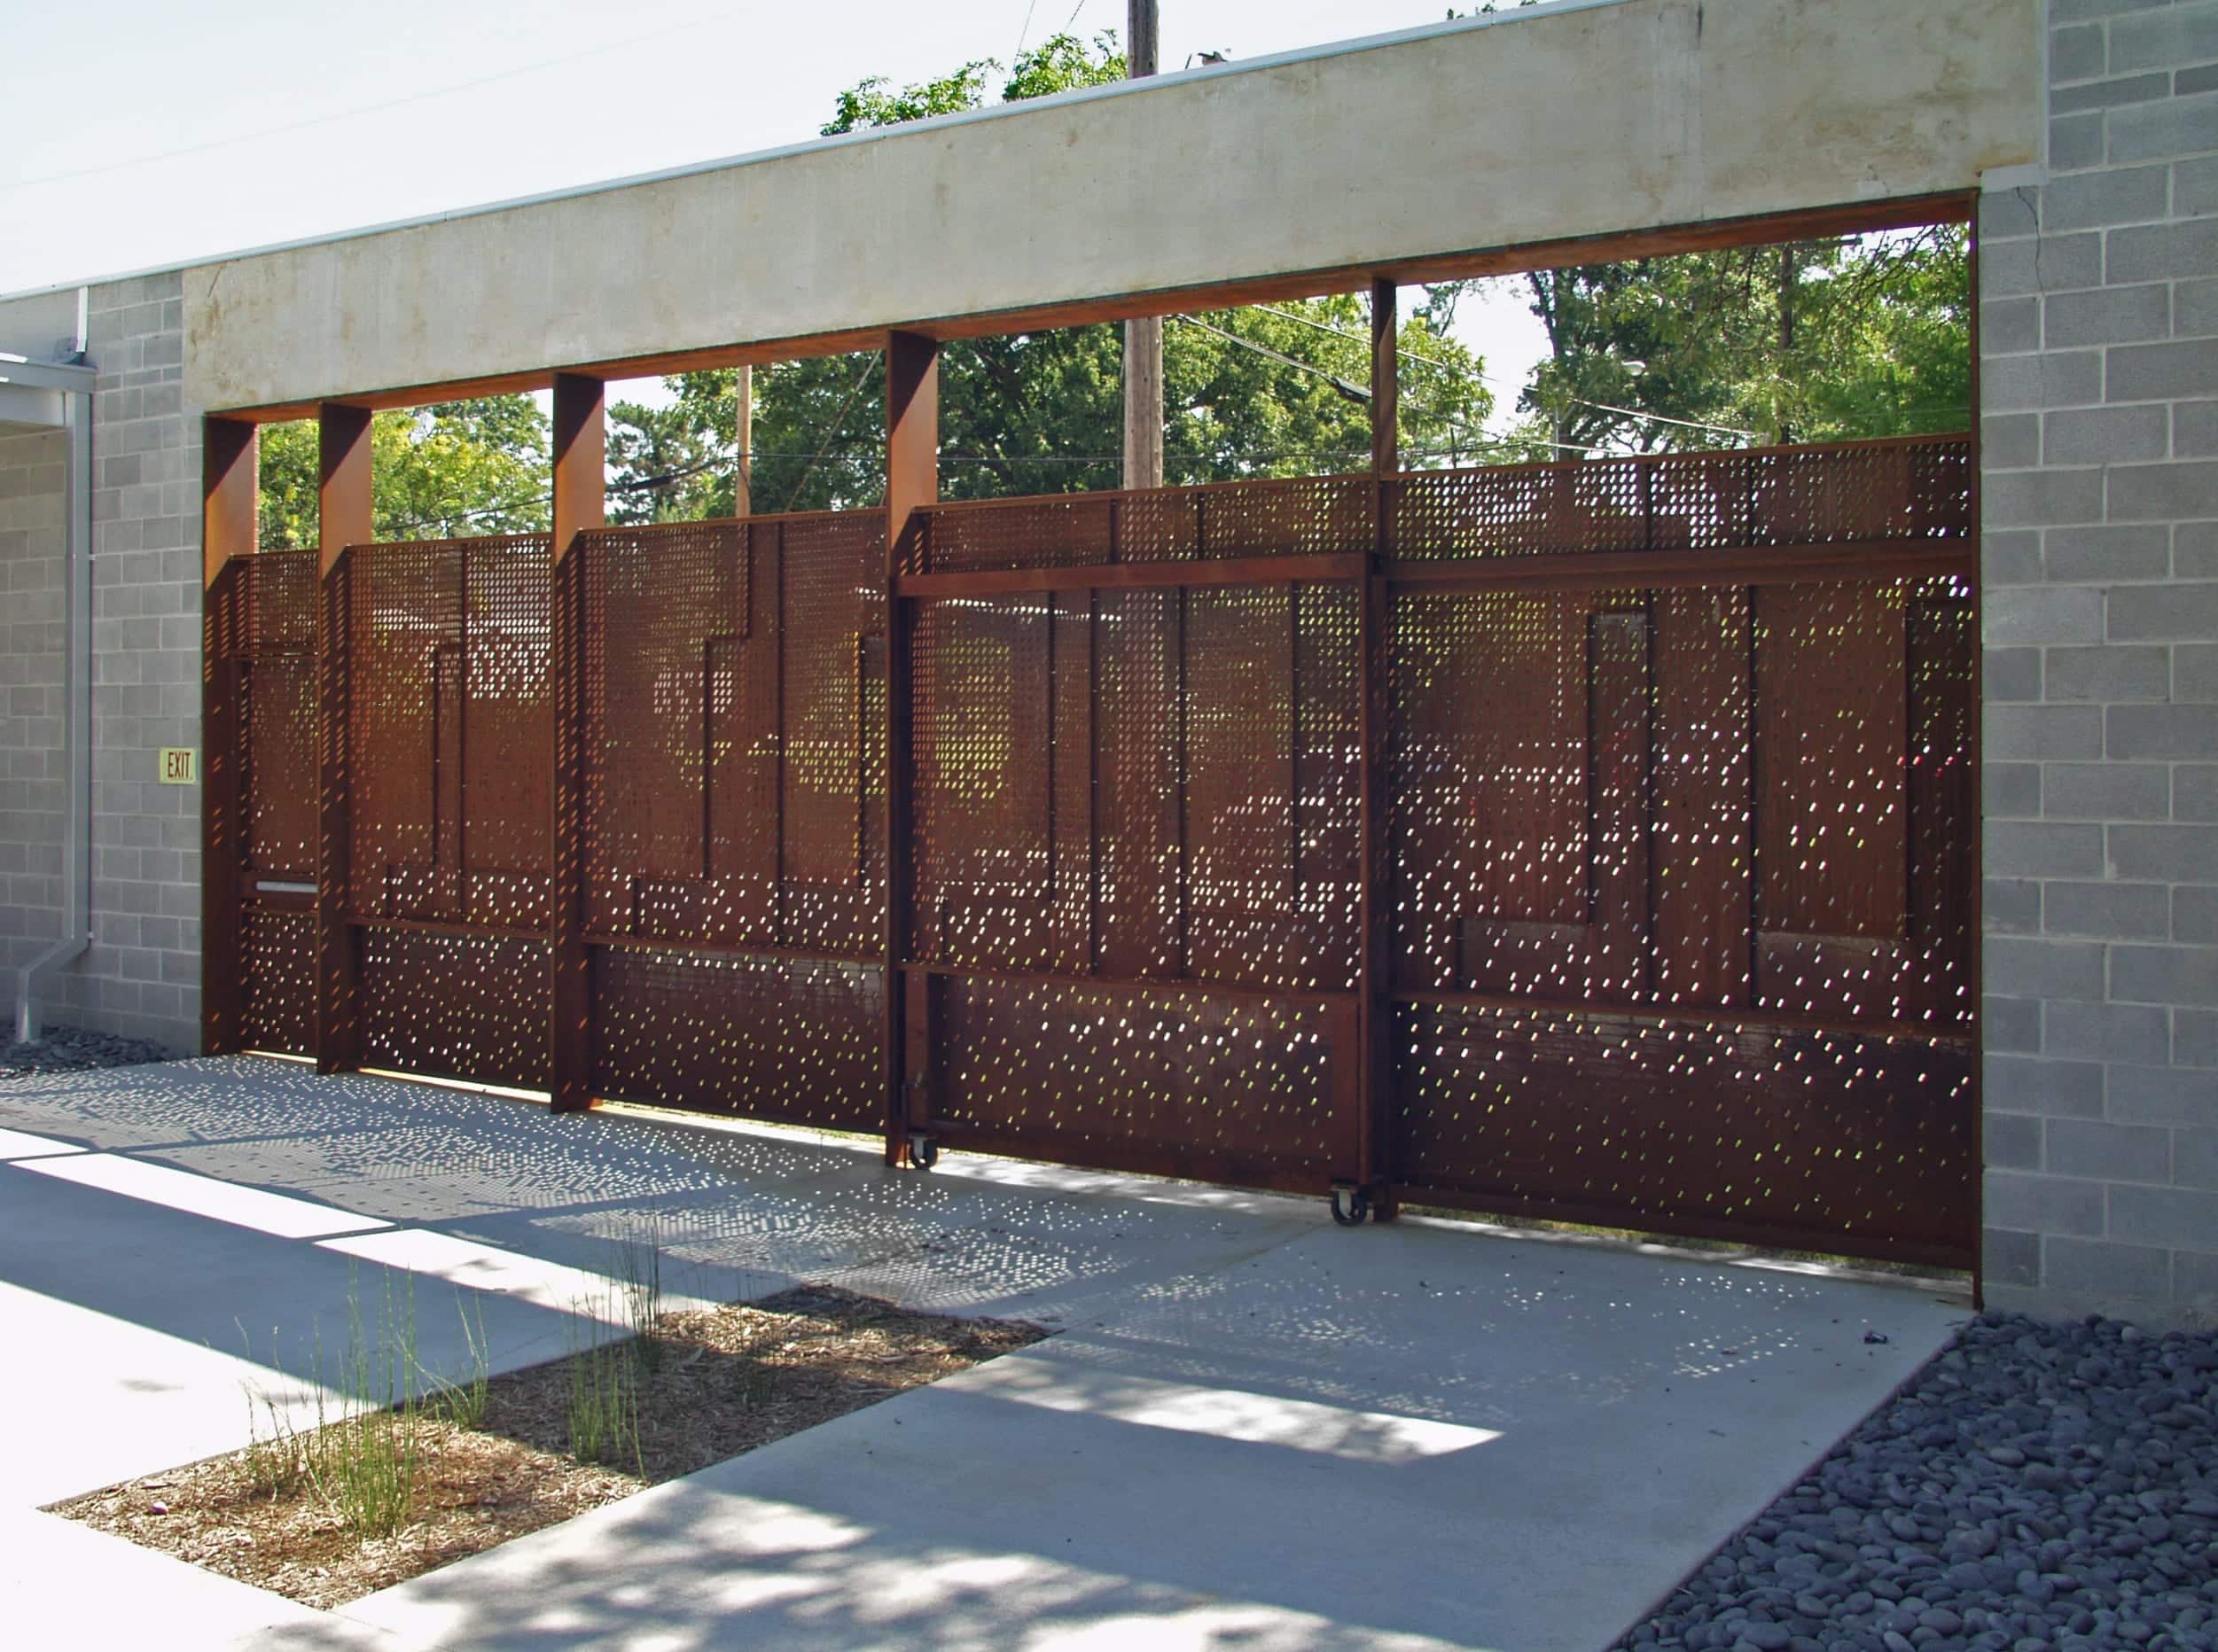 LIGHT ENTERS THE SPACE THROUGH THE CUSTOM PERFORATED METAL FOR THE IRVING COURTYARD SCREENWALL.